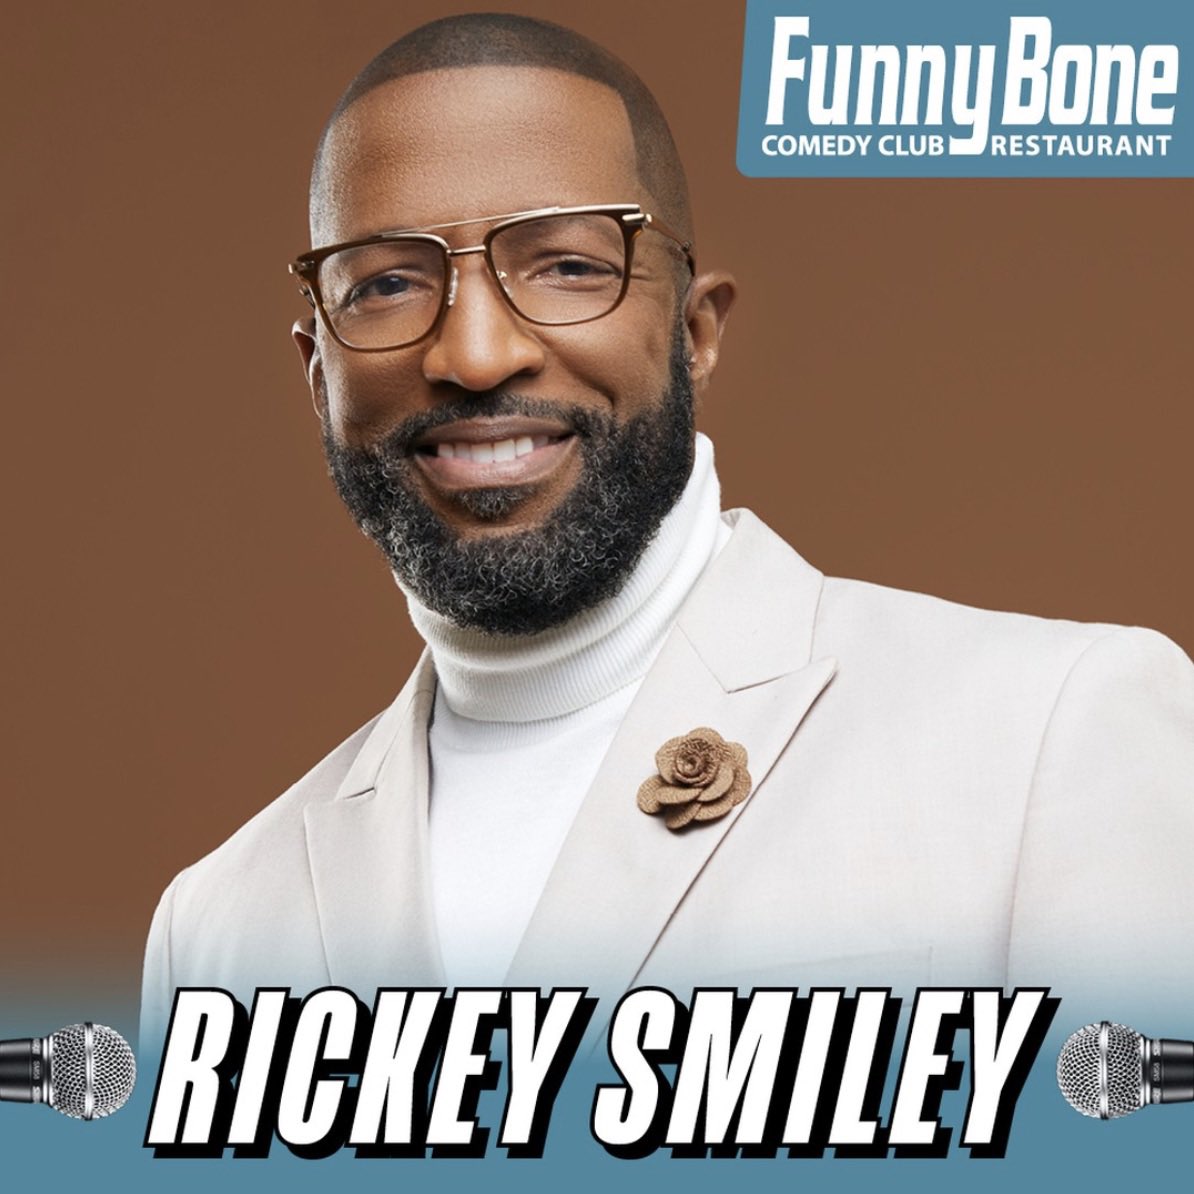 Come see me perform in #Orlando this summer!! I’ll be at the @FunnyBoneORL July 7th-9th, and you can get your tickets now at RickeySmiley.com!!